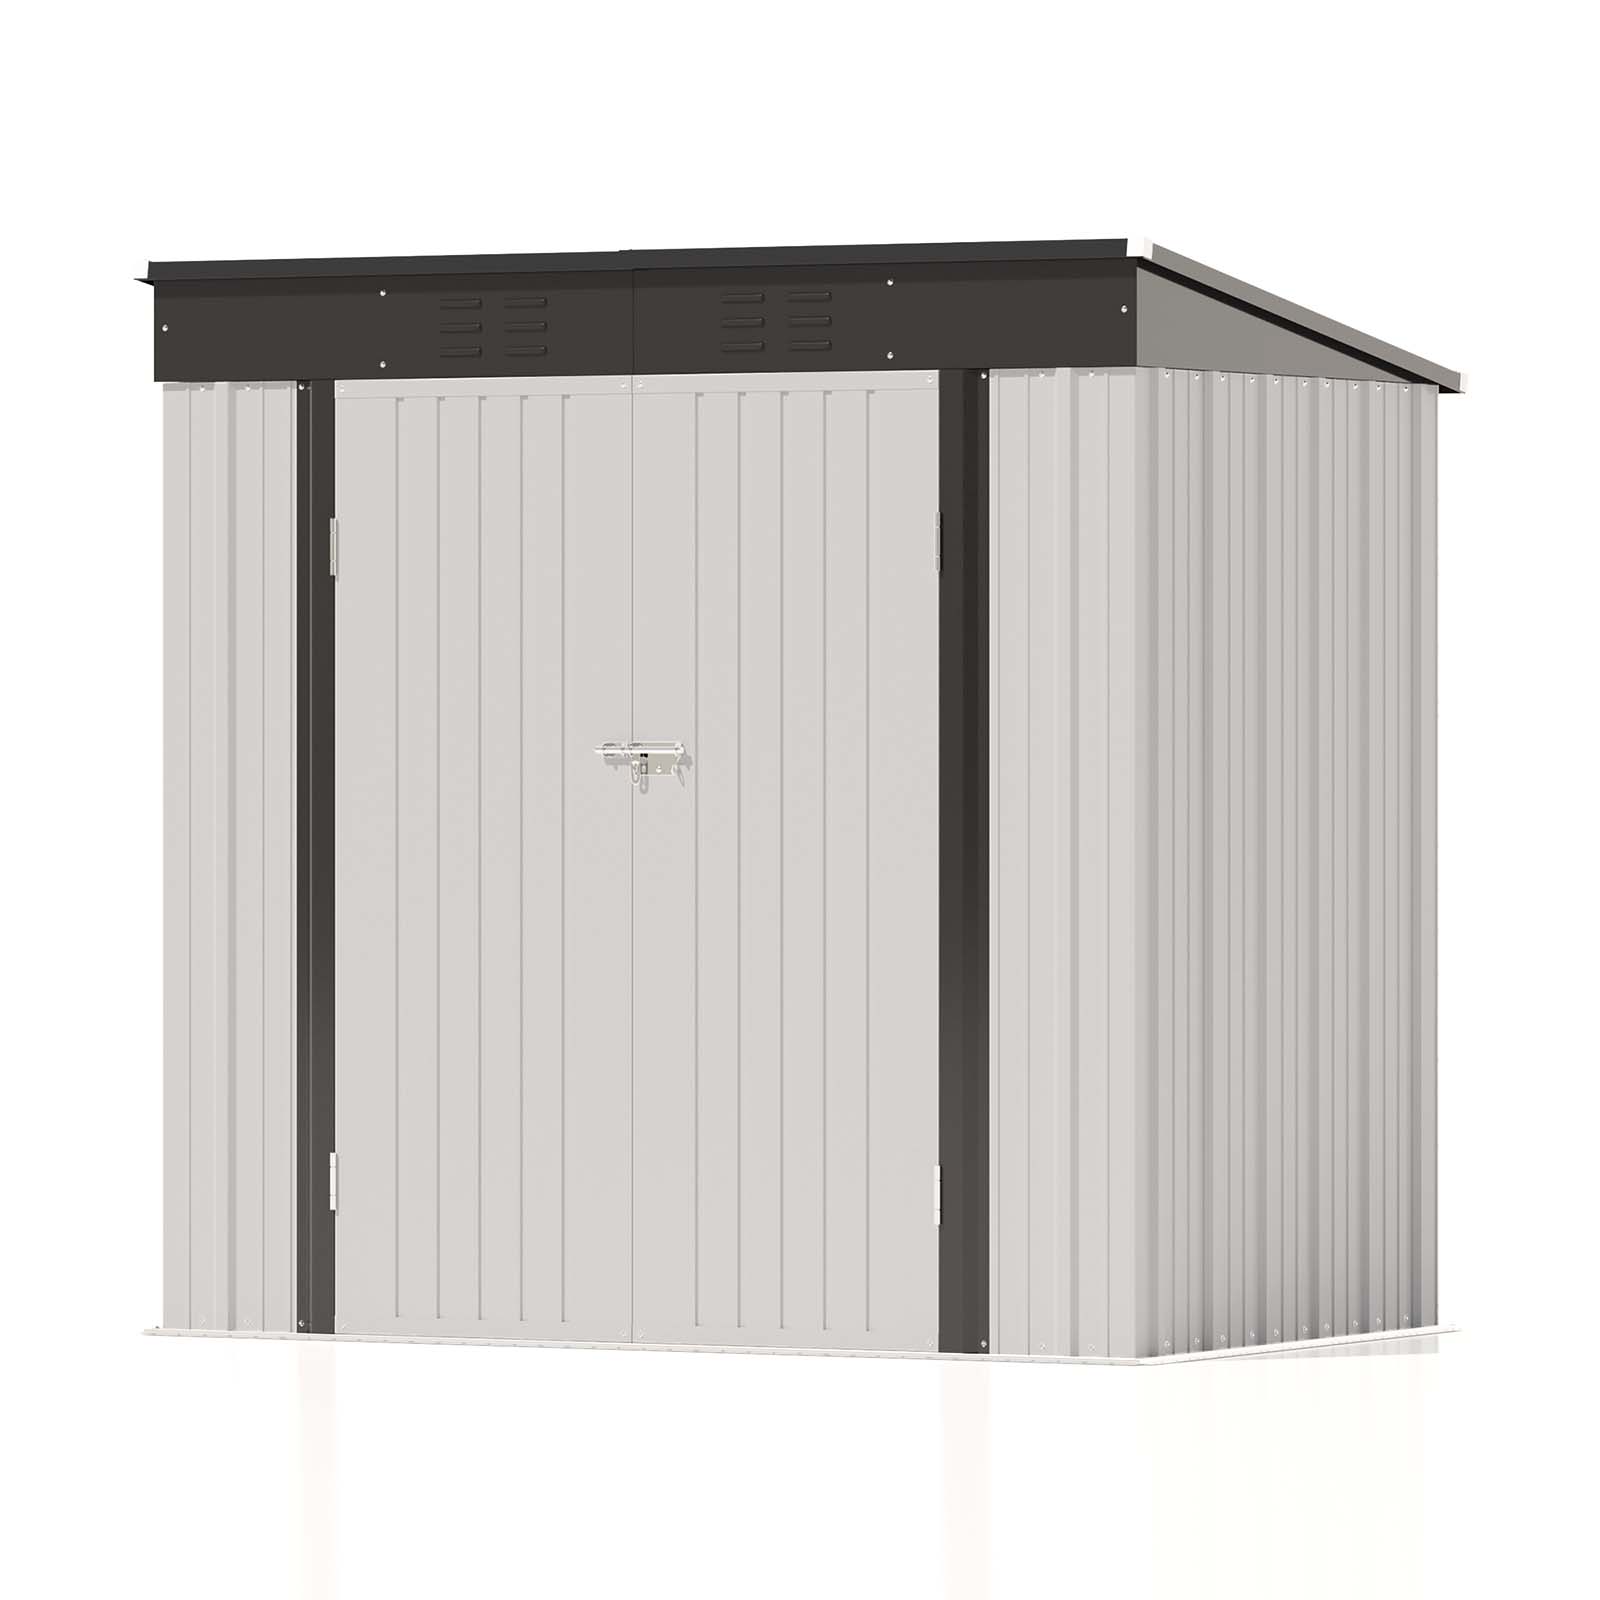 Patiowell 6x4 Metal Shed-Pure White